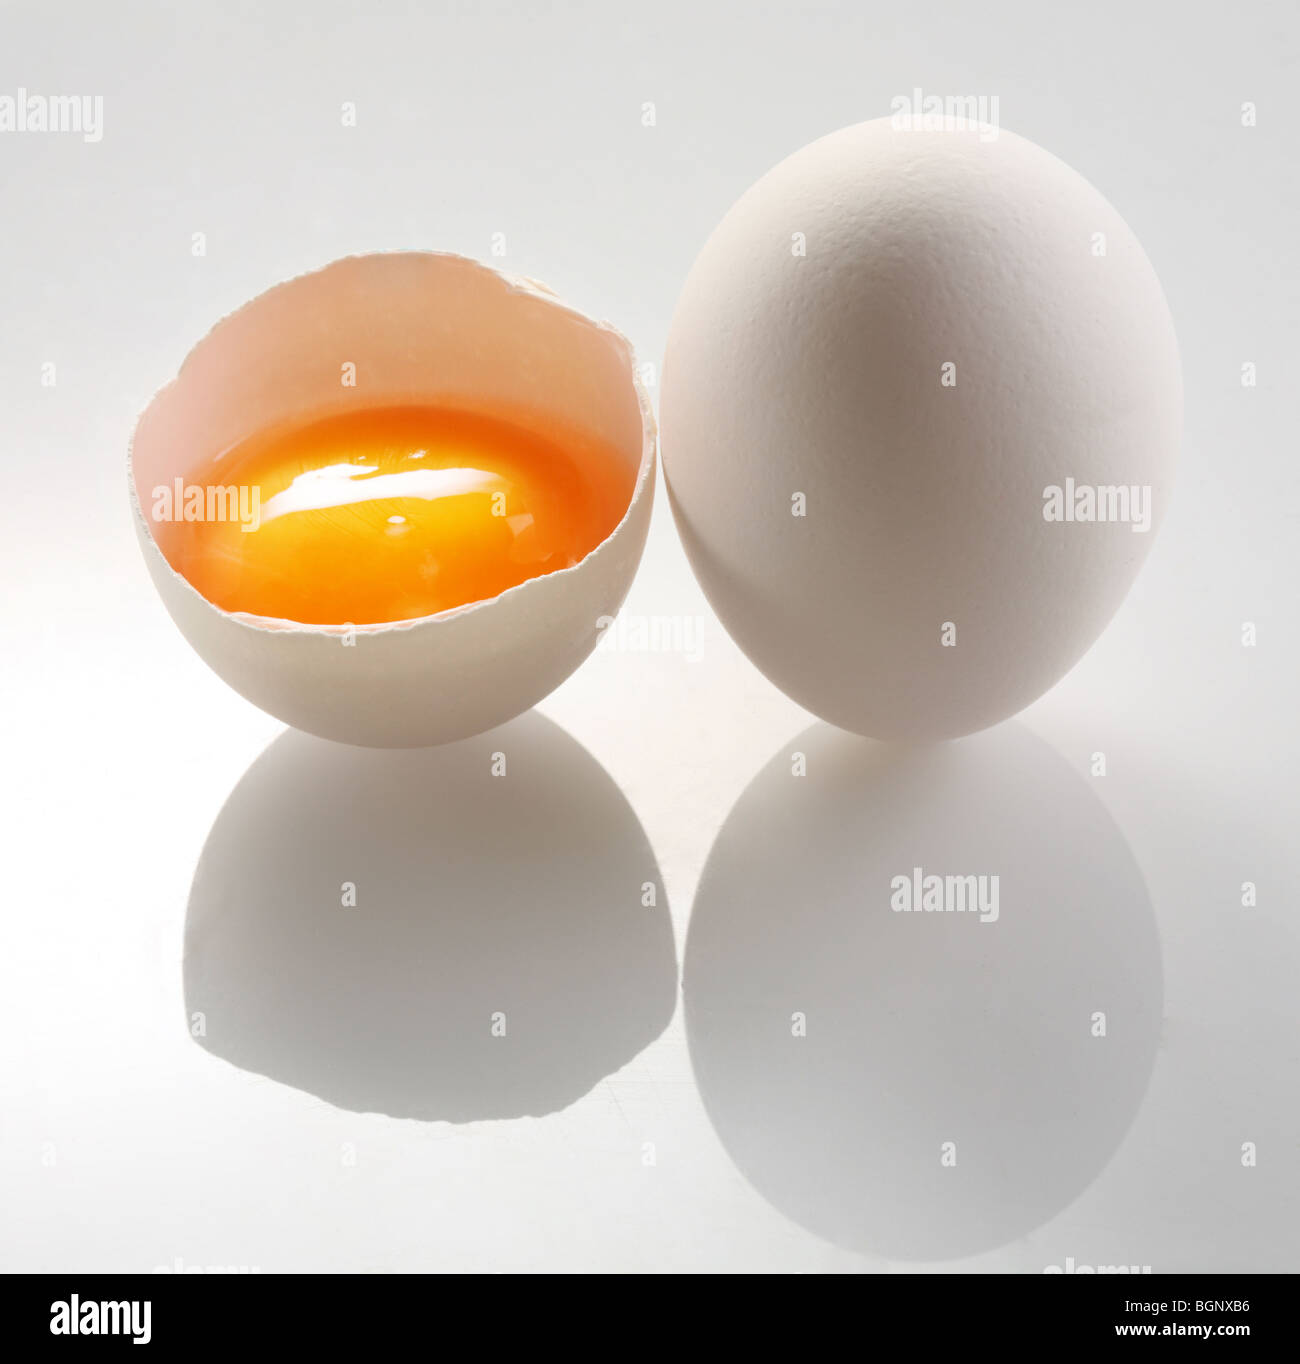 white egg and a half eggs on a white background. Stock Photo